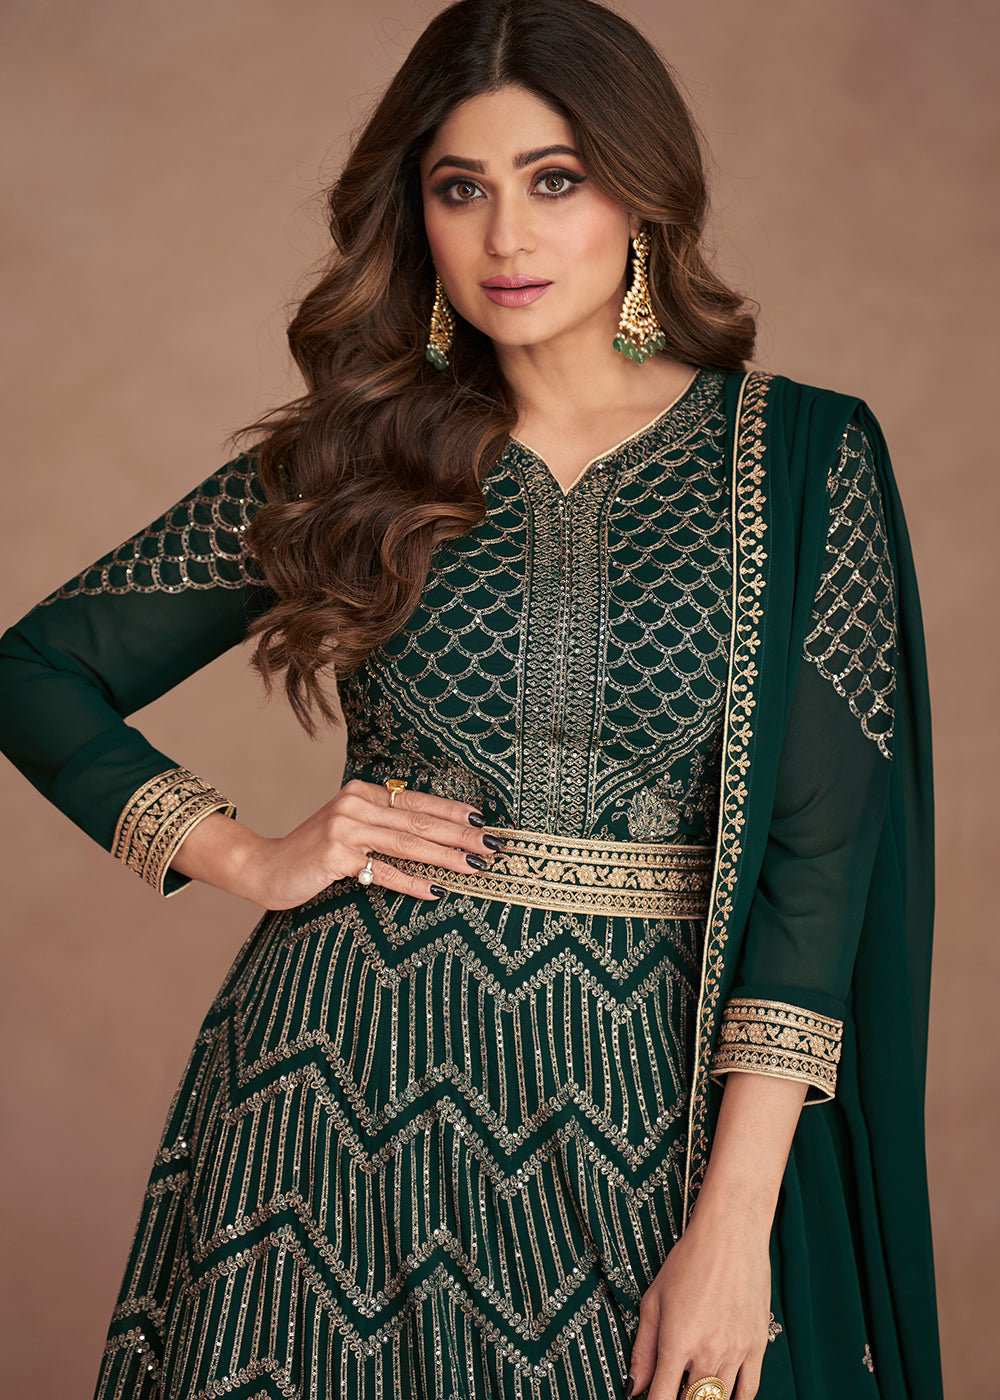 Buy Now Sequined Embroidered Dark Green Shamita Shetty Anarkali Gown Online in USA, UK, Australia, New Zealand, Canada, Italy & Worldwide at Empress Clothing. 